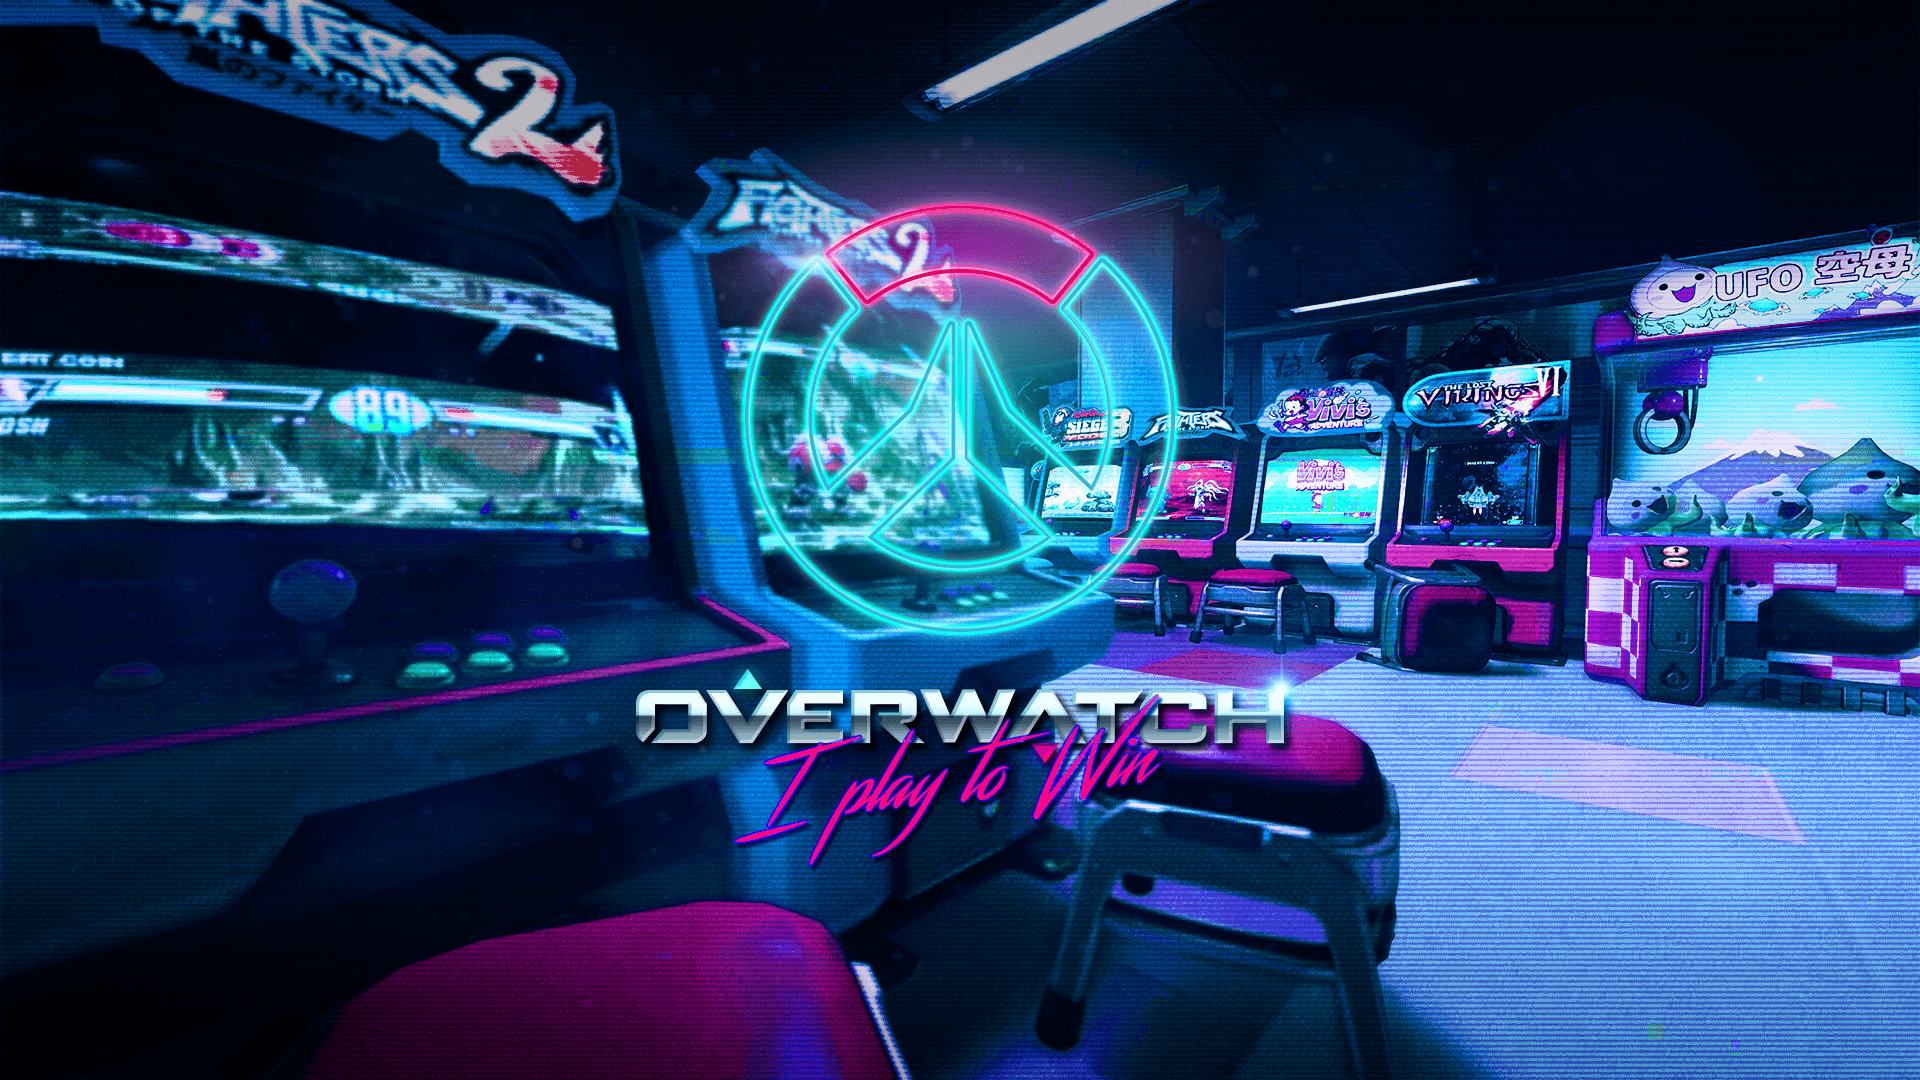 Overwatch synthwave retro something something kind of wallpaper